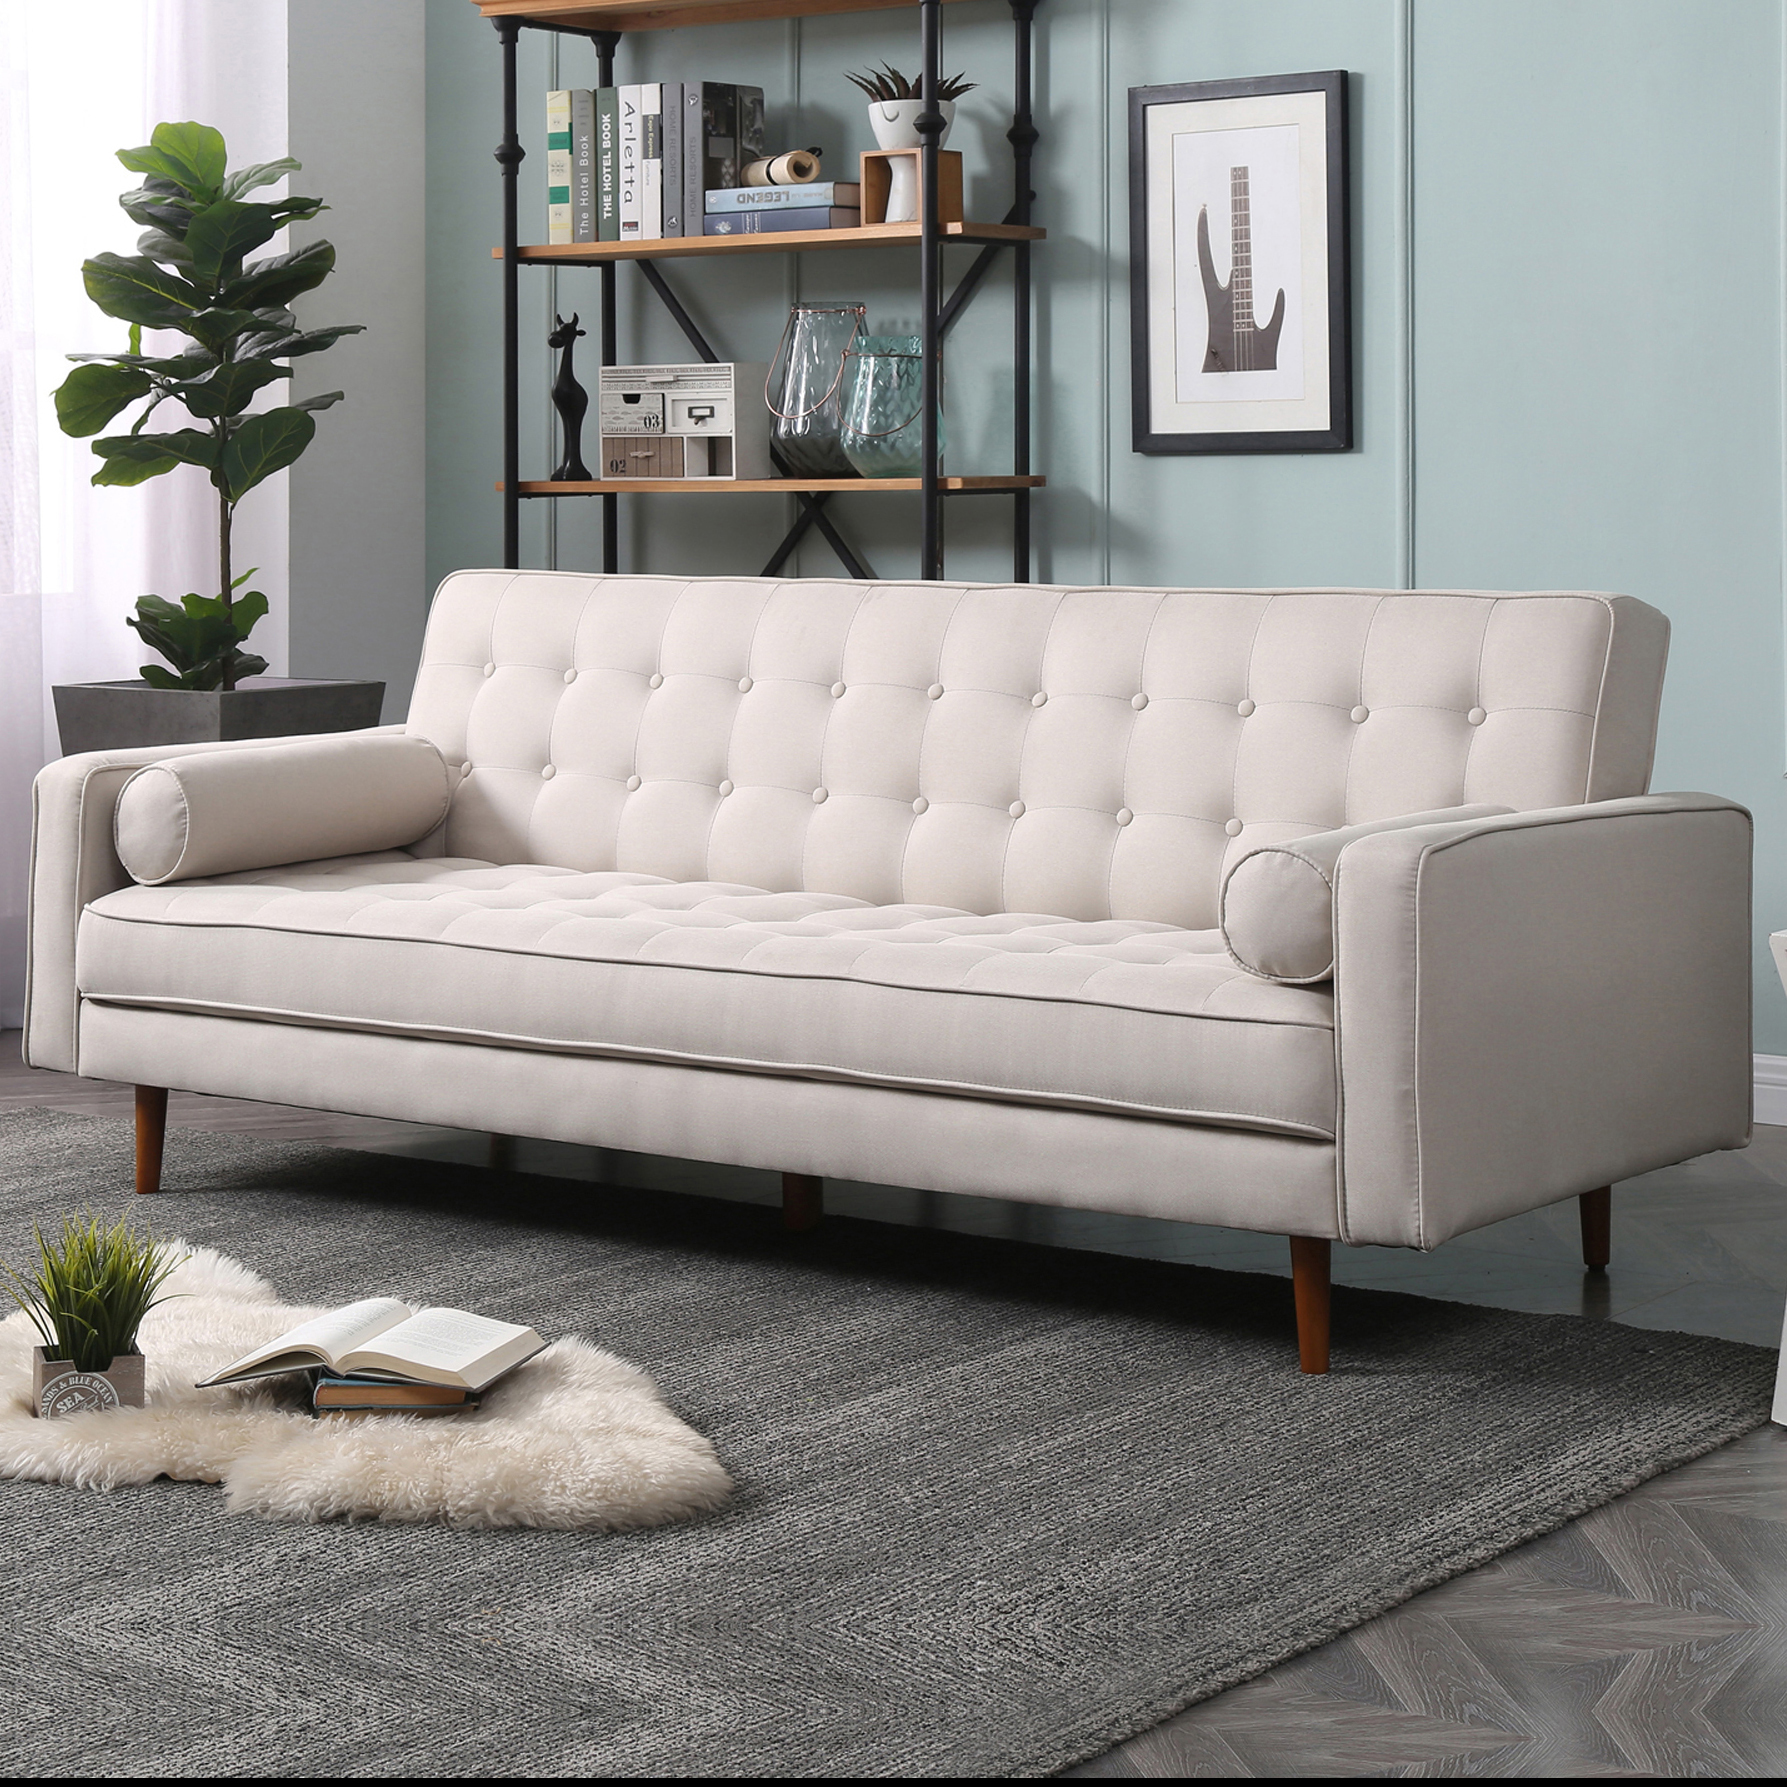 Panana Modern 3 Seater Sofa Bed Line Fabric Sofa Couch Settee Click Clack Recliner Sleeper with 2 Free Cushions for Living Room Beige 